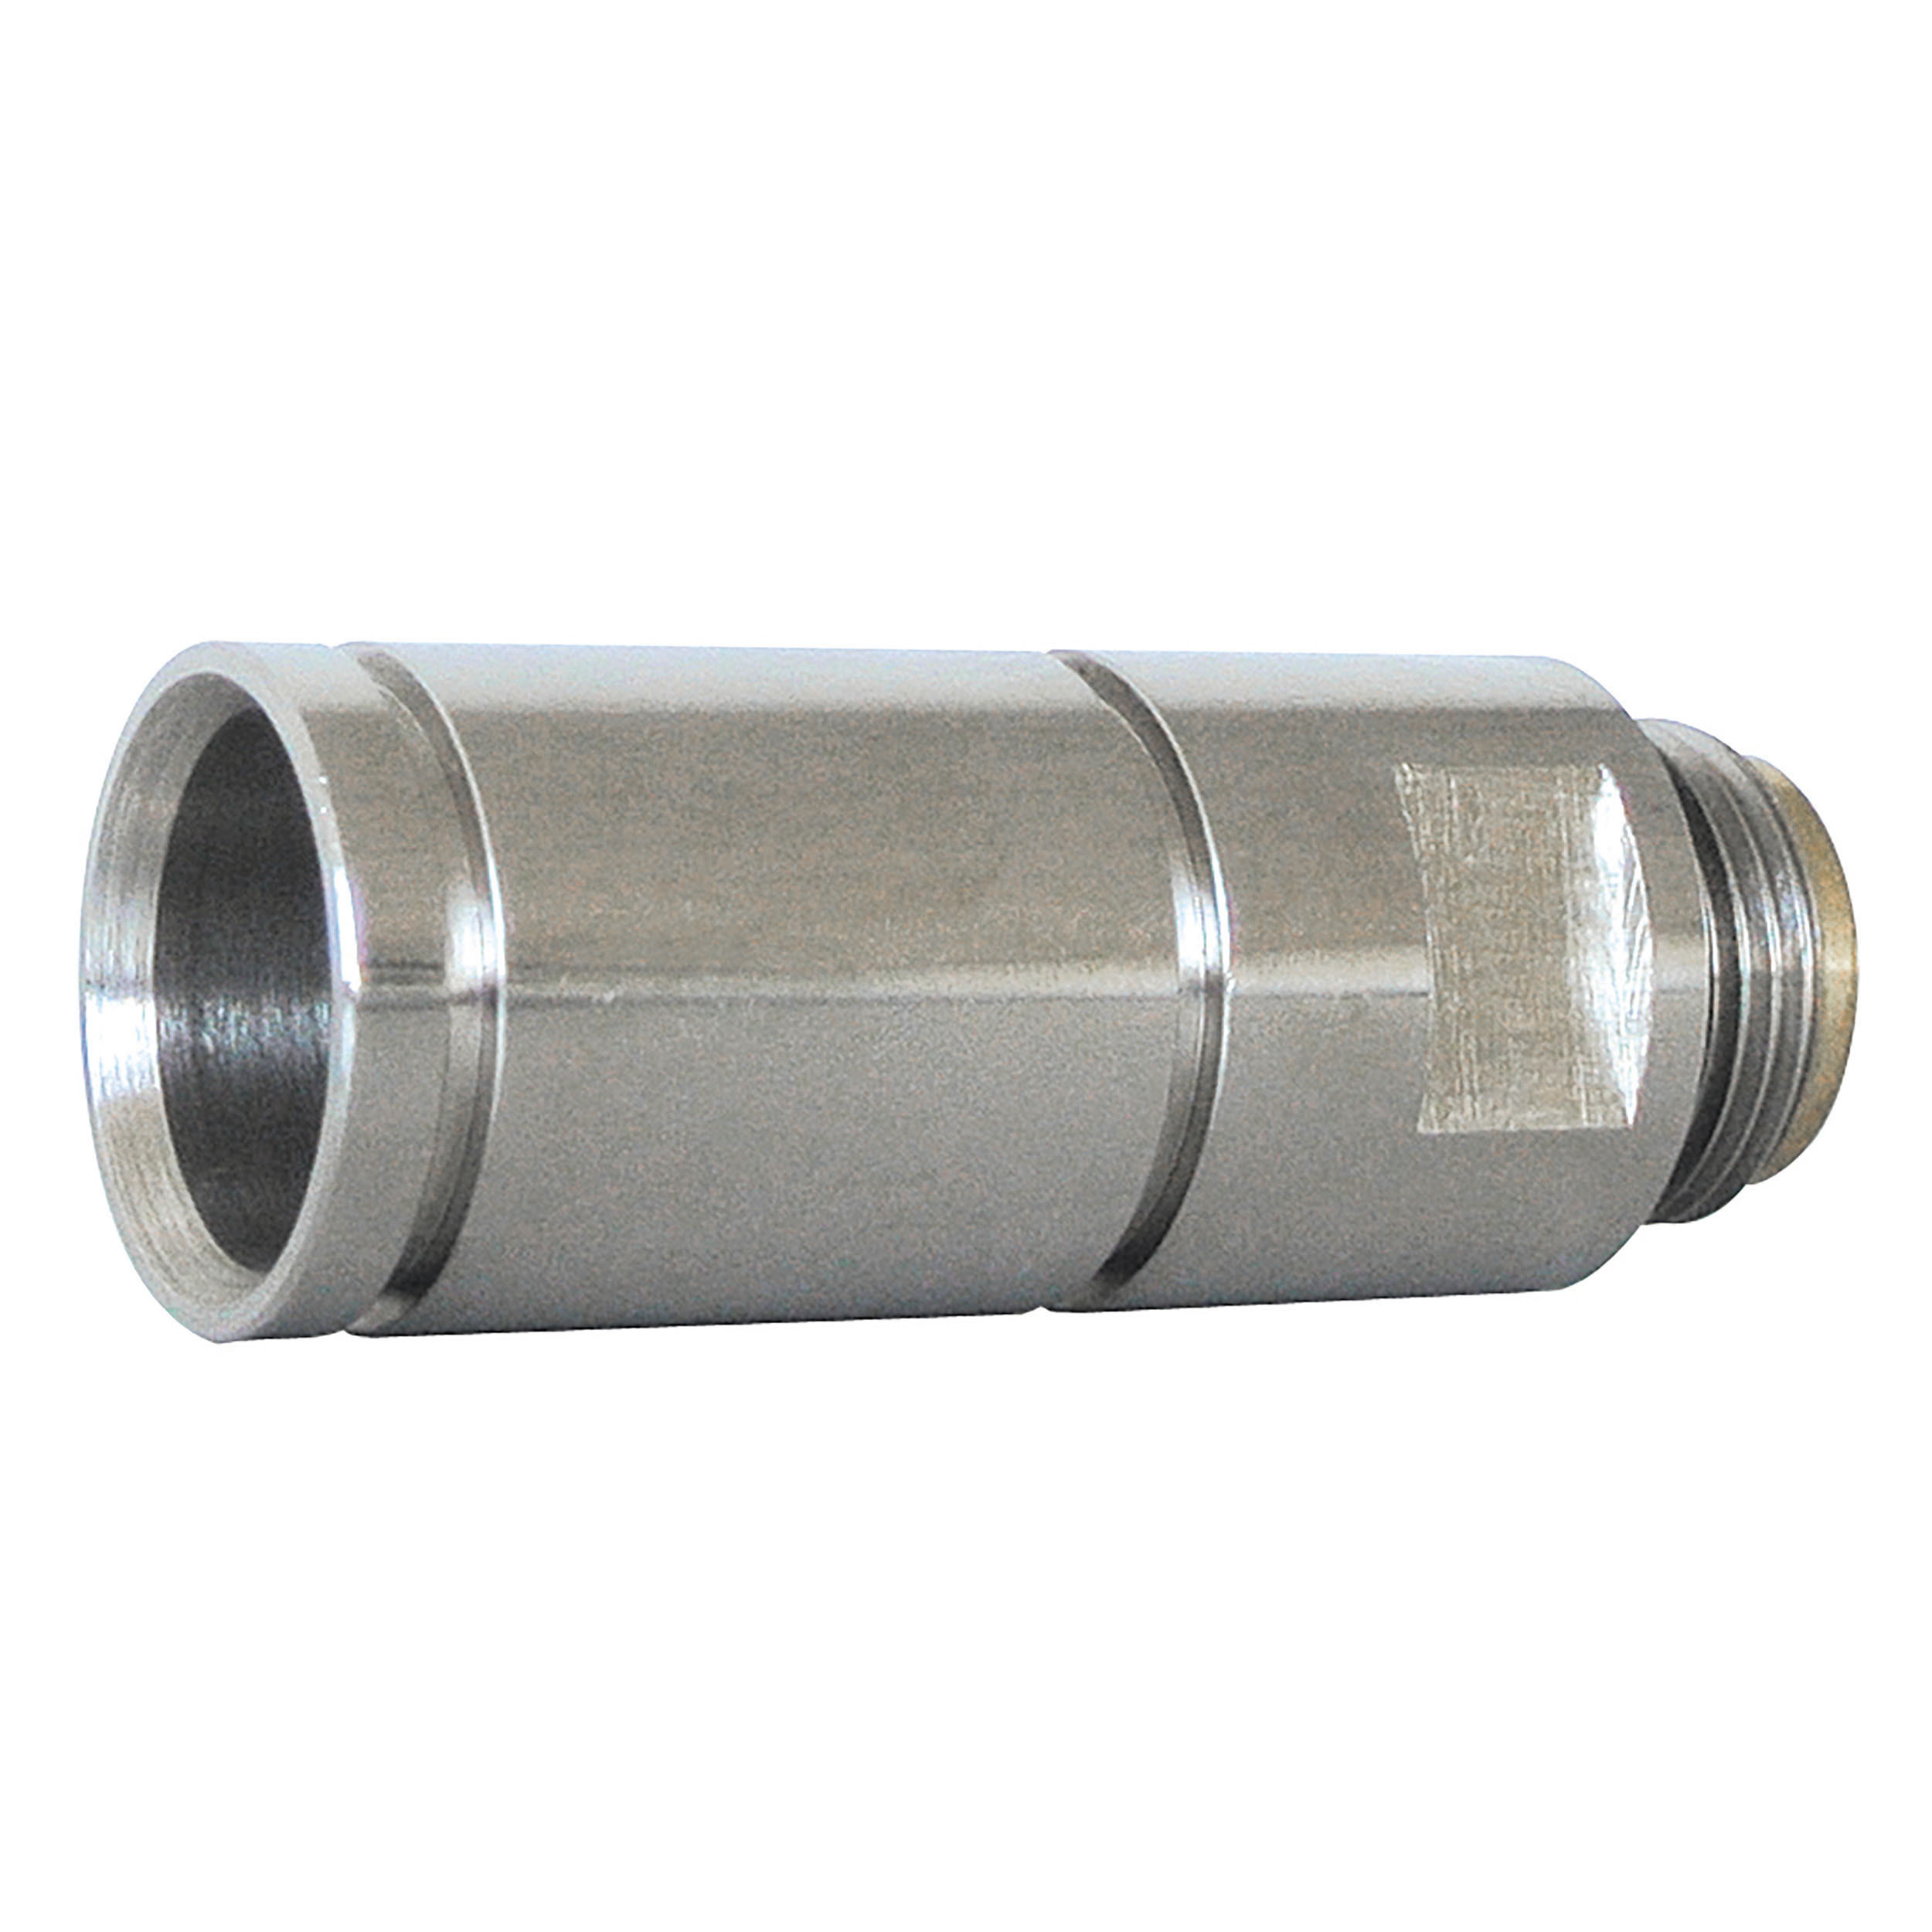 Special nozzle, nozzle-Ø4 mm, length: 58 mm, connection thread: M 21 × 1.5, with an o-ring, for 416